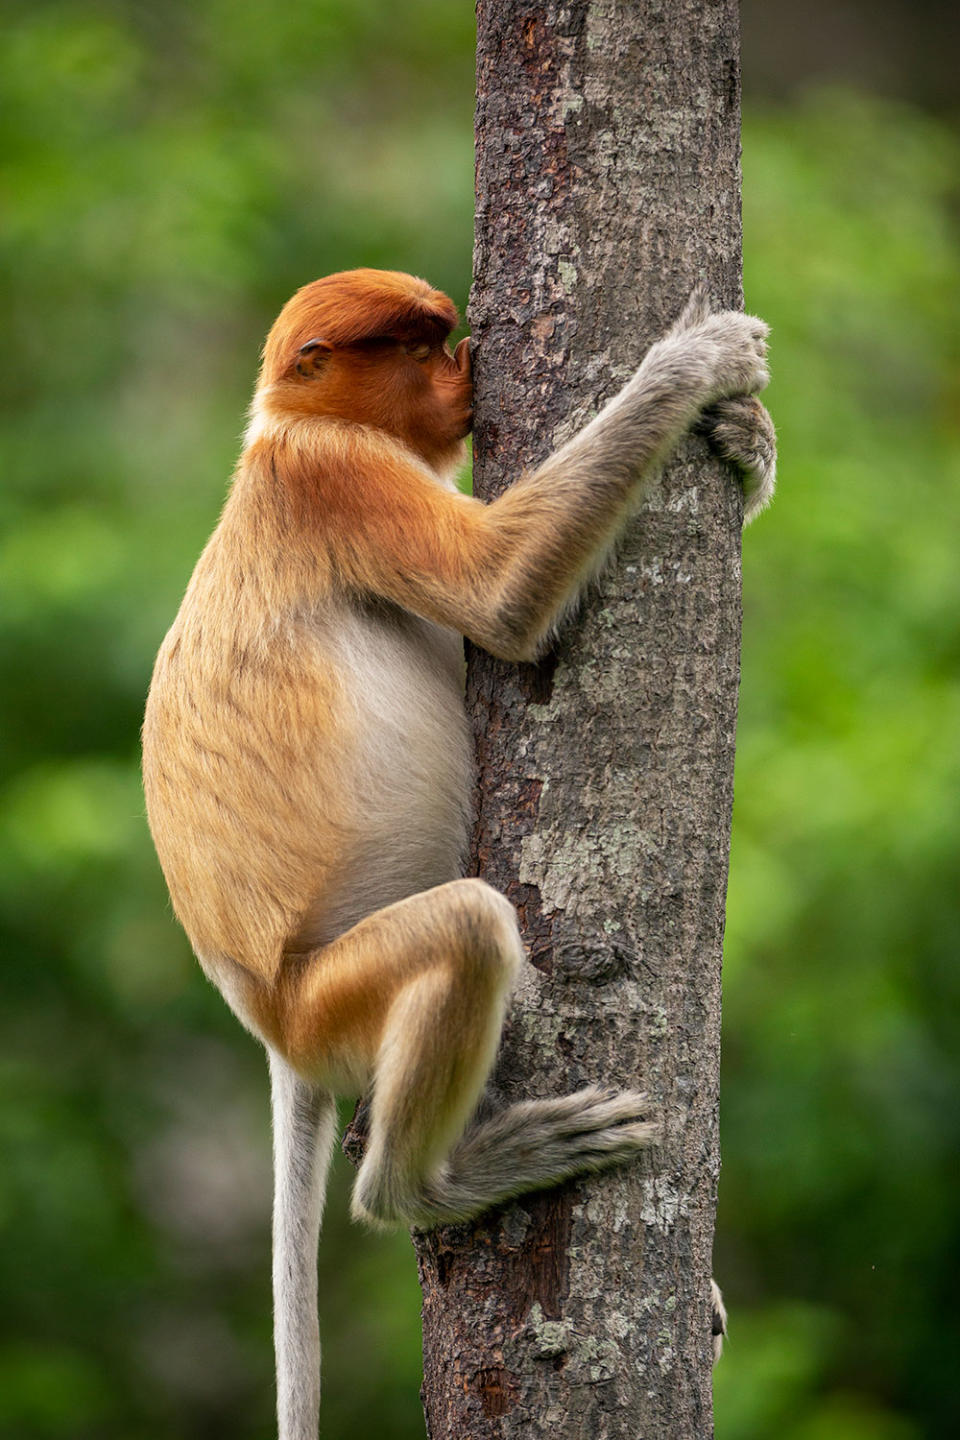 <p>"This Proboscis monkey could be just scratching its nose on the rough bark, or it could be kissing it. Trees play a big role in the lives of monkeys. Who are we to judge..." writes Hodan.</p>